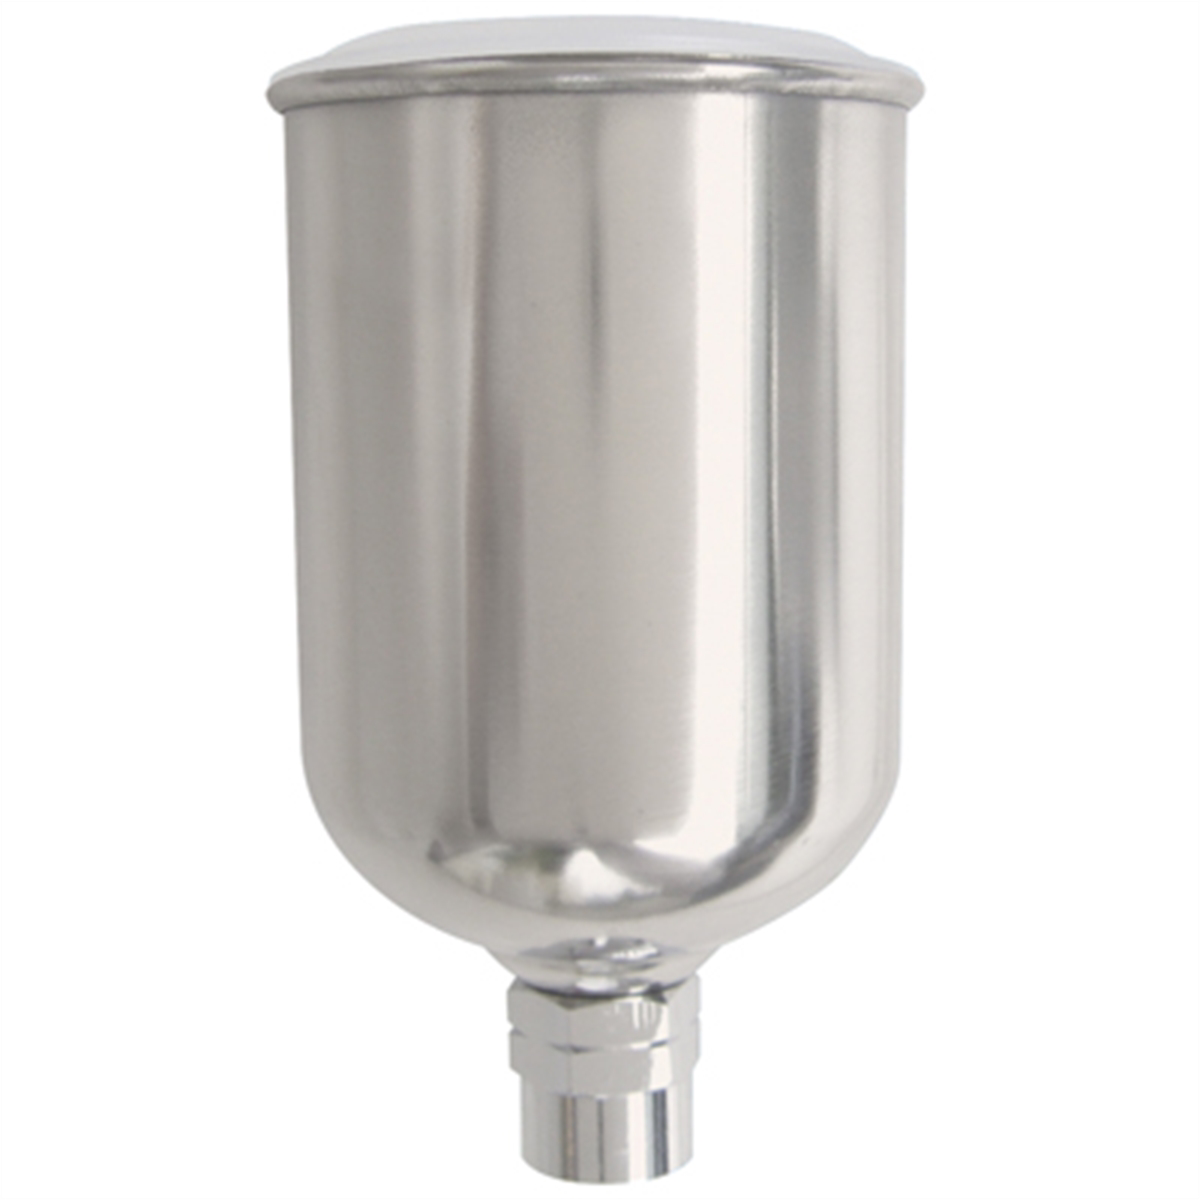 Stainless Steel Gravity Feed Paint Cup, 150ml